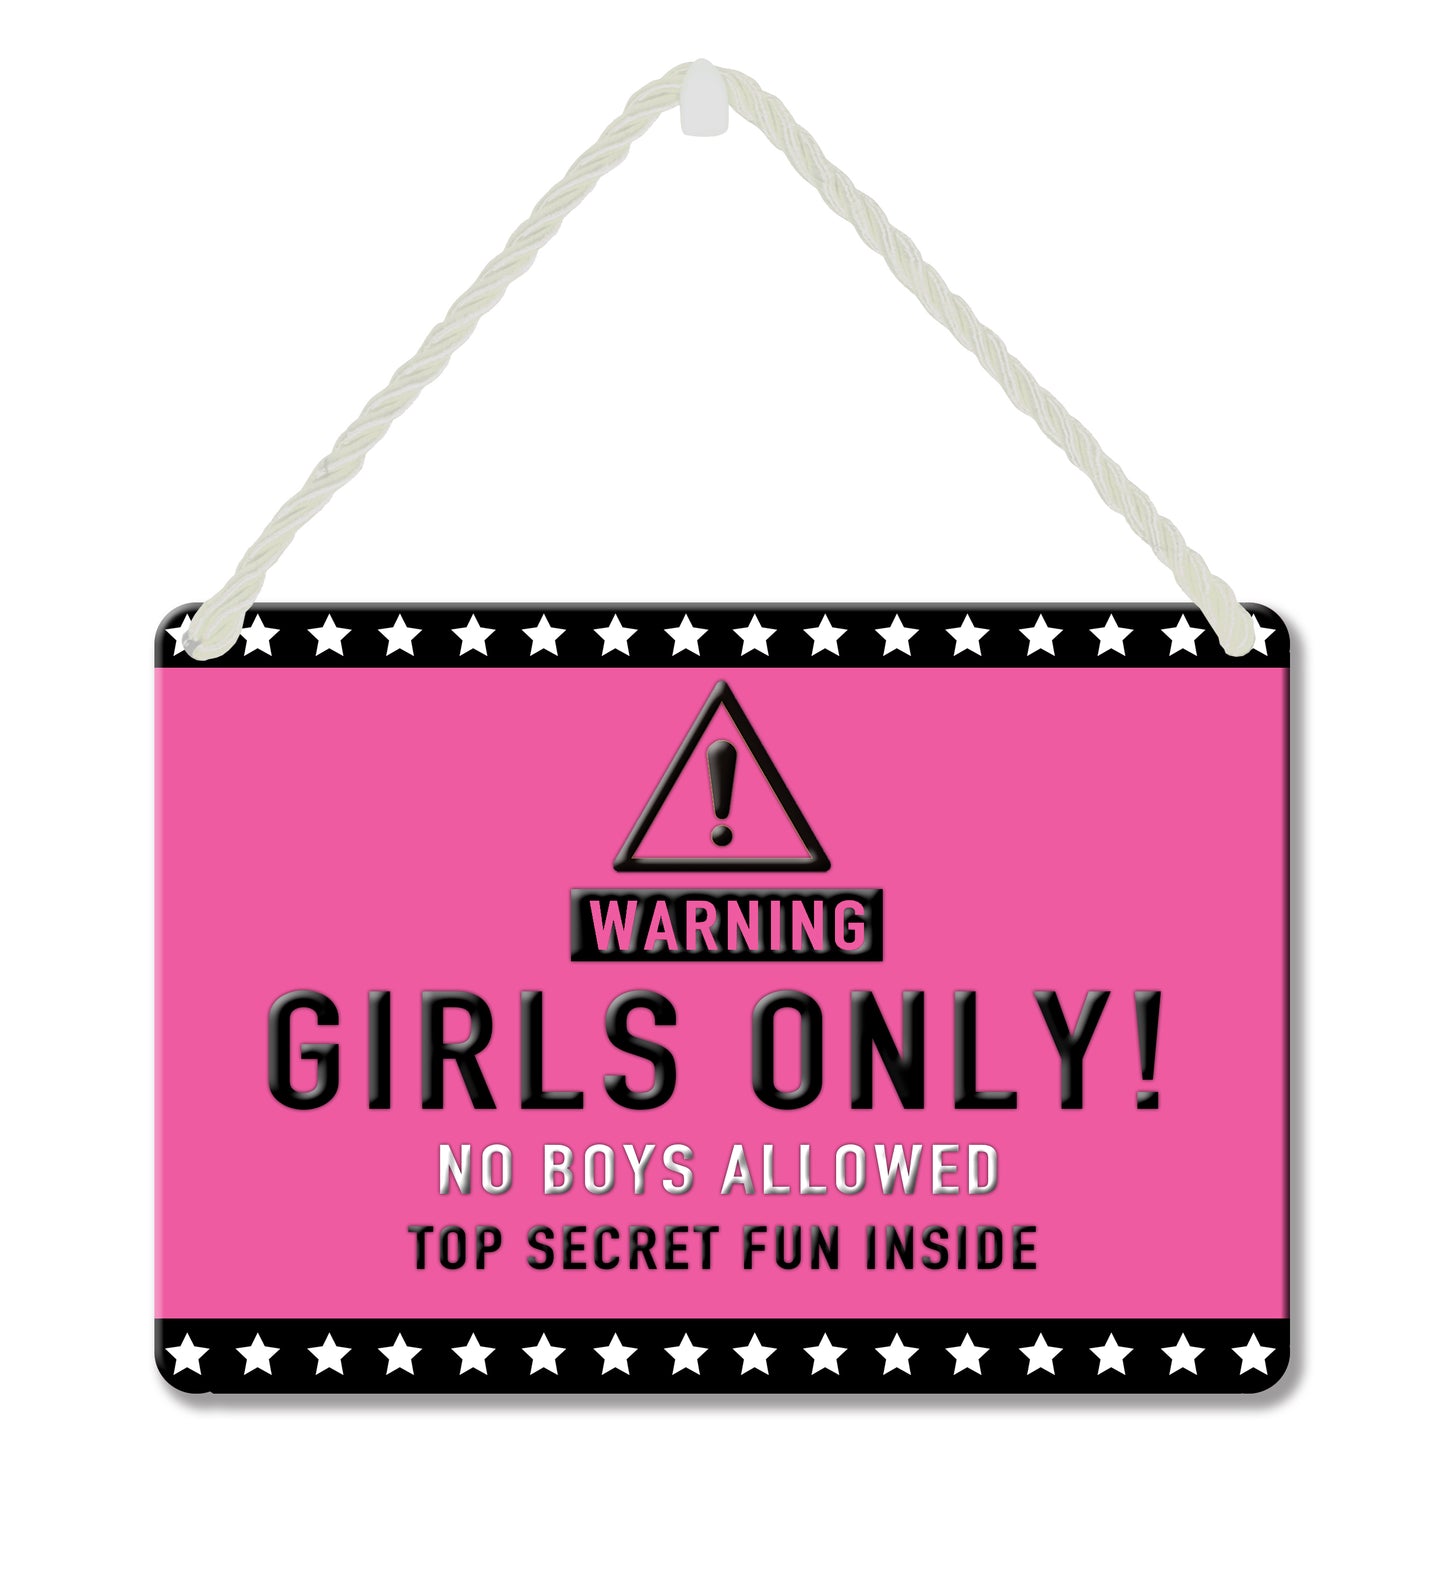 Warning Girls Only No Boys Allowed Tin Hanging Plaque